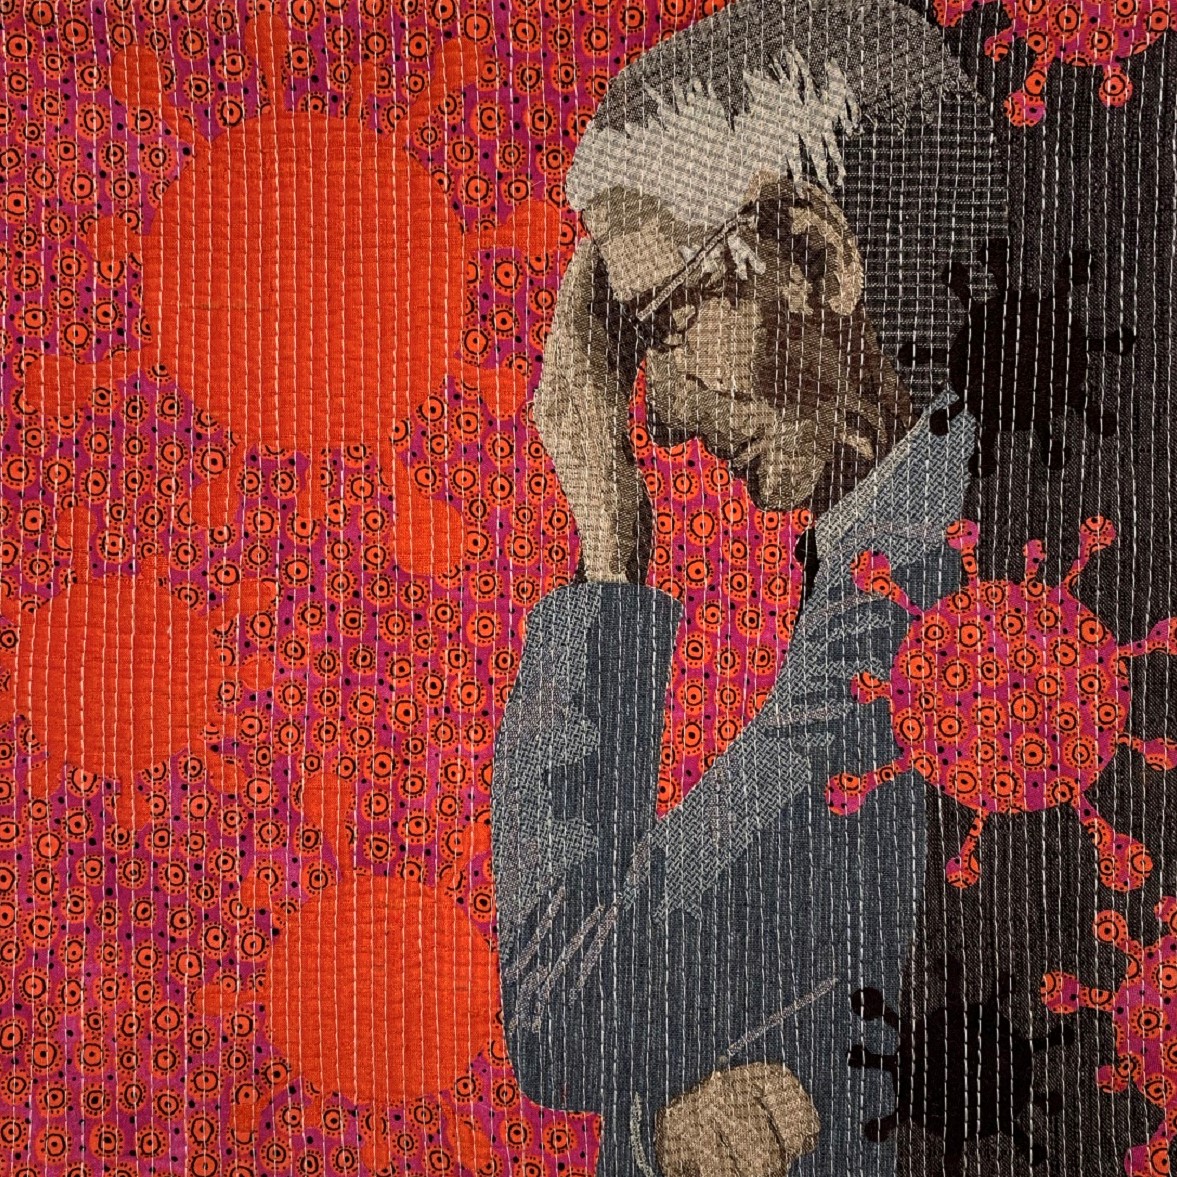 Dr Fauci vs 2020<br>Martha Wolfe<br>Quilt<br>12" x 12"<br>$1000